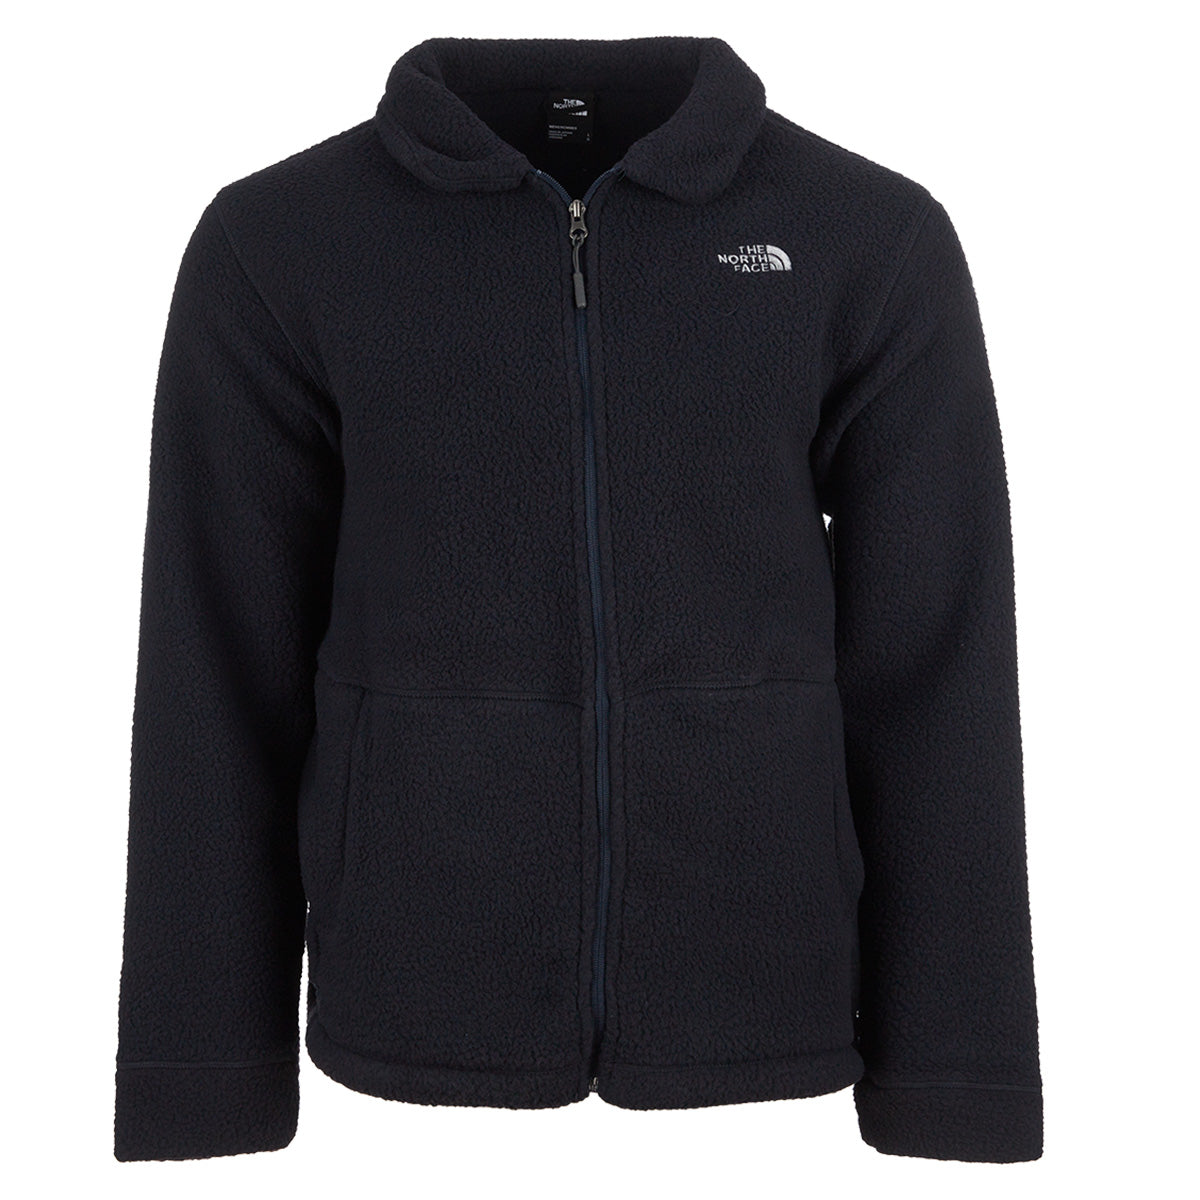 Image of The North Face Men's Full Zip Sherpa Jacket